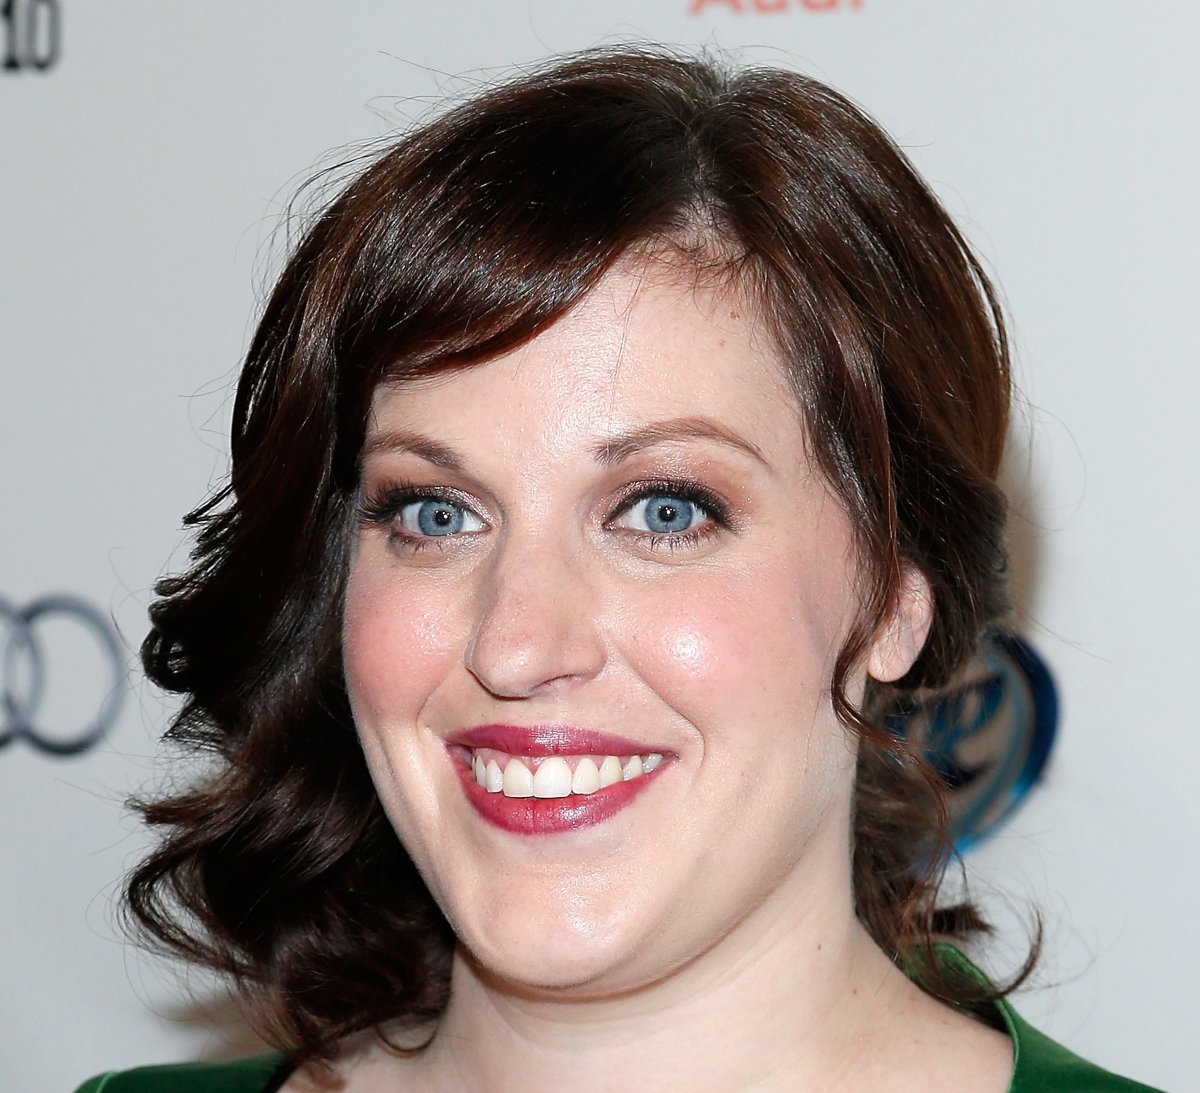 Allison Tolman attends the FX Networks Upfront screening of ‘Fargo’ at SVA Theater on April 9, 2014 in New York City